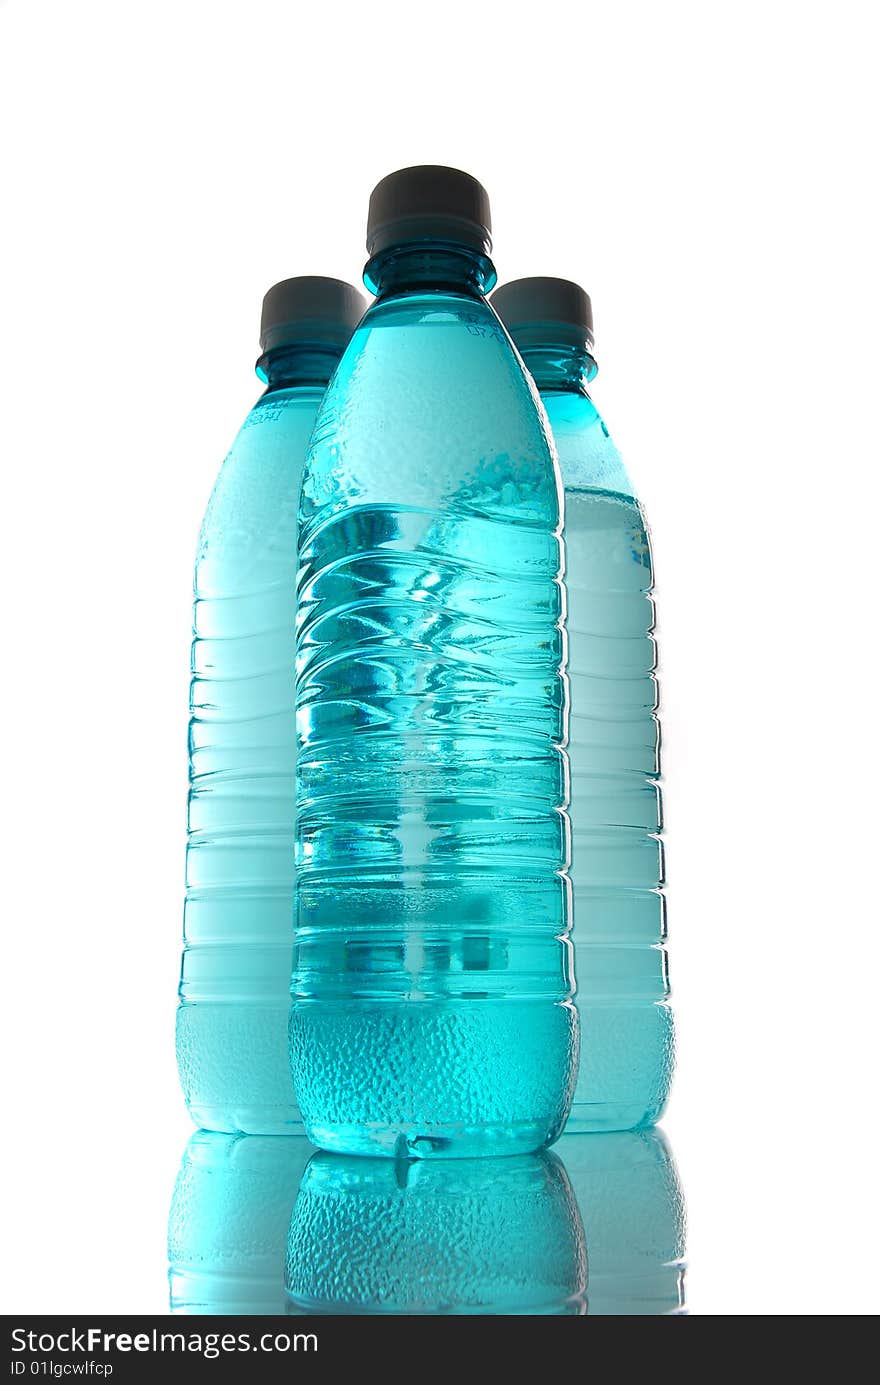 Plastic bottle of mineral water